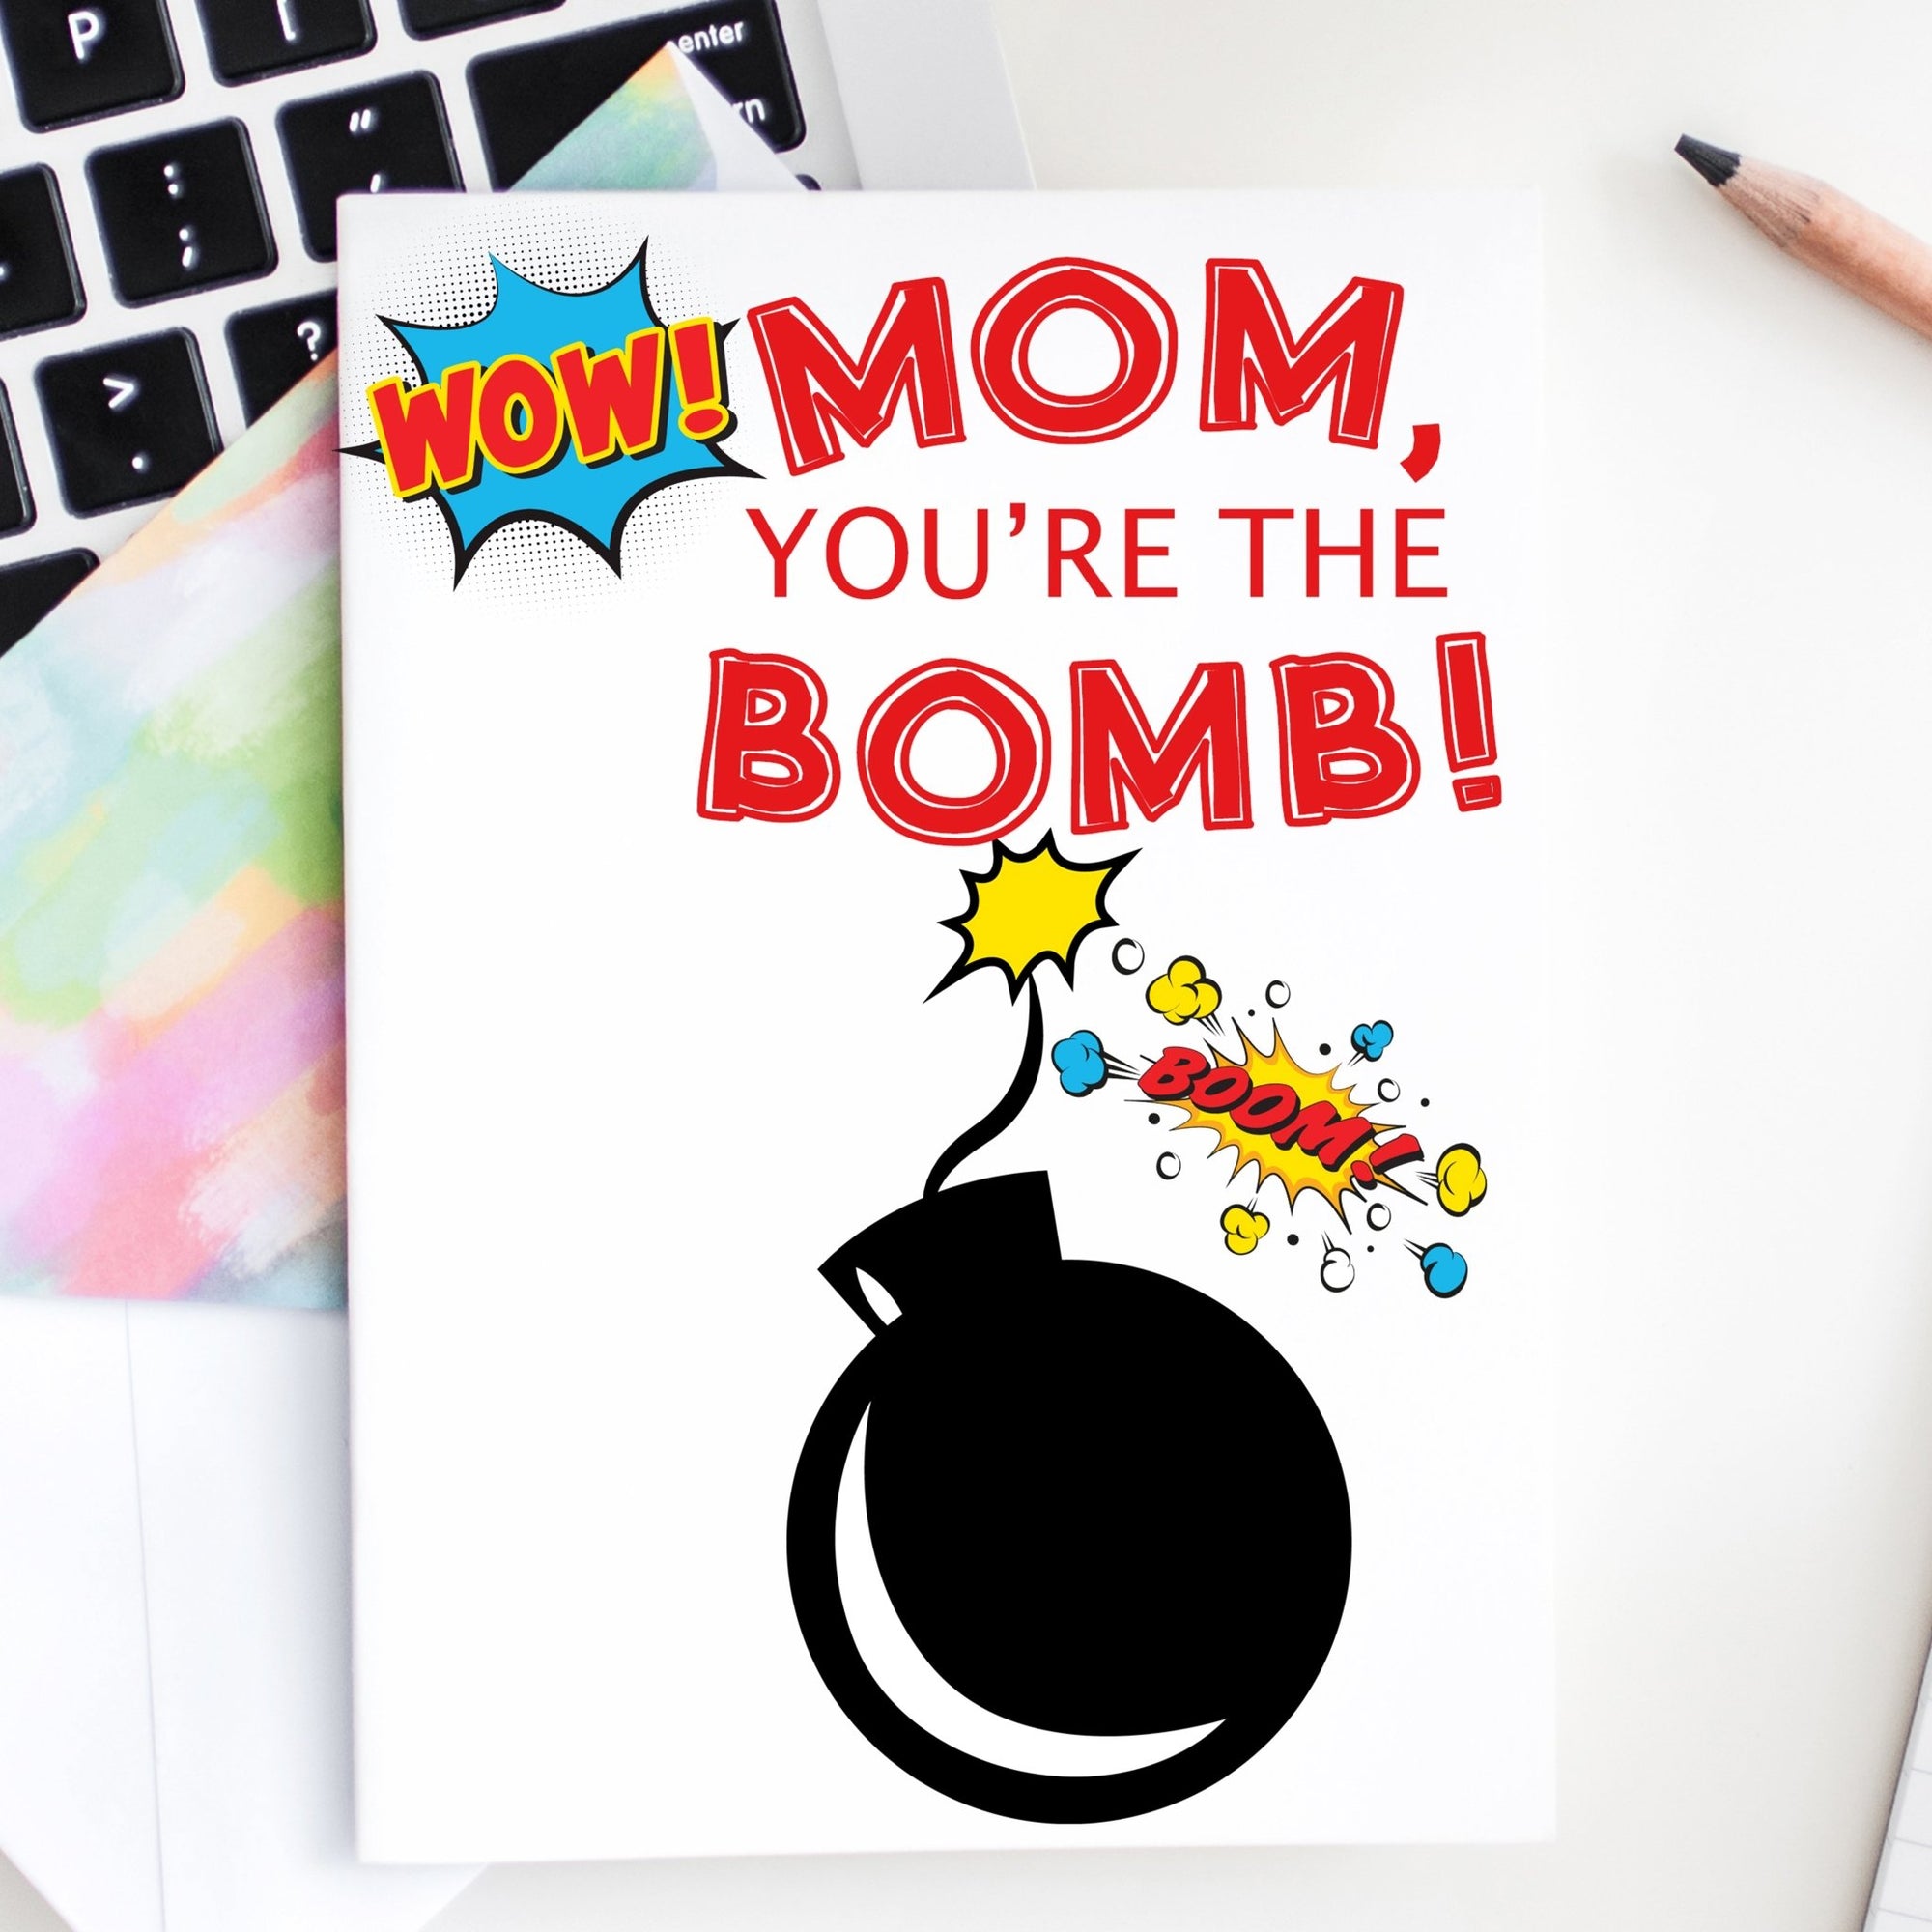 Mom, You're the Bomb - FREE Mother's Day Card Printable - Pretty Collected